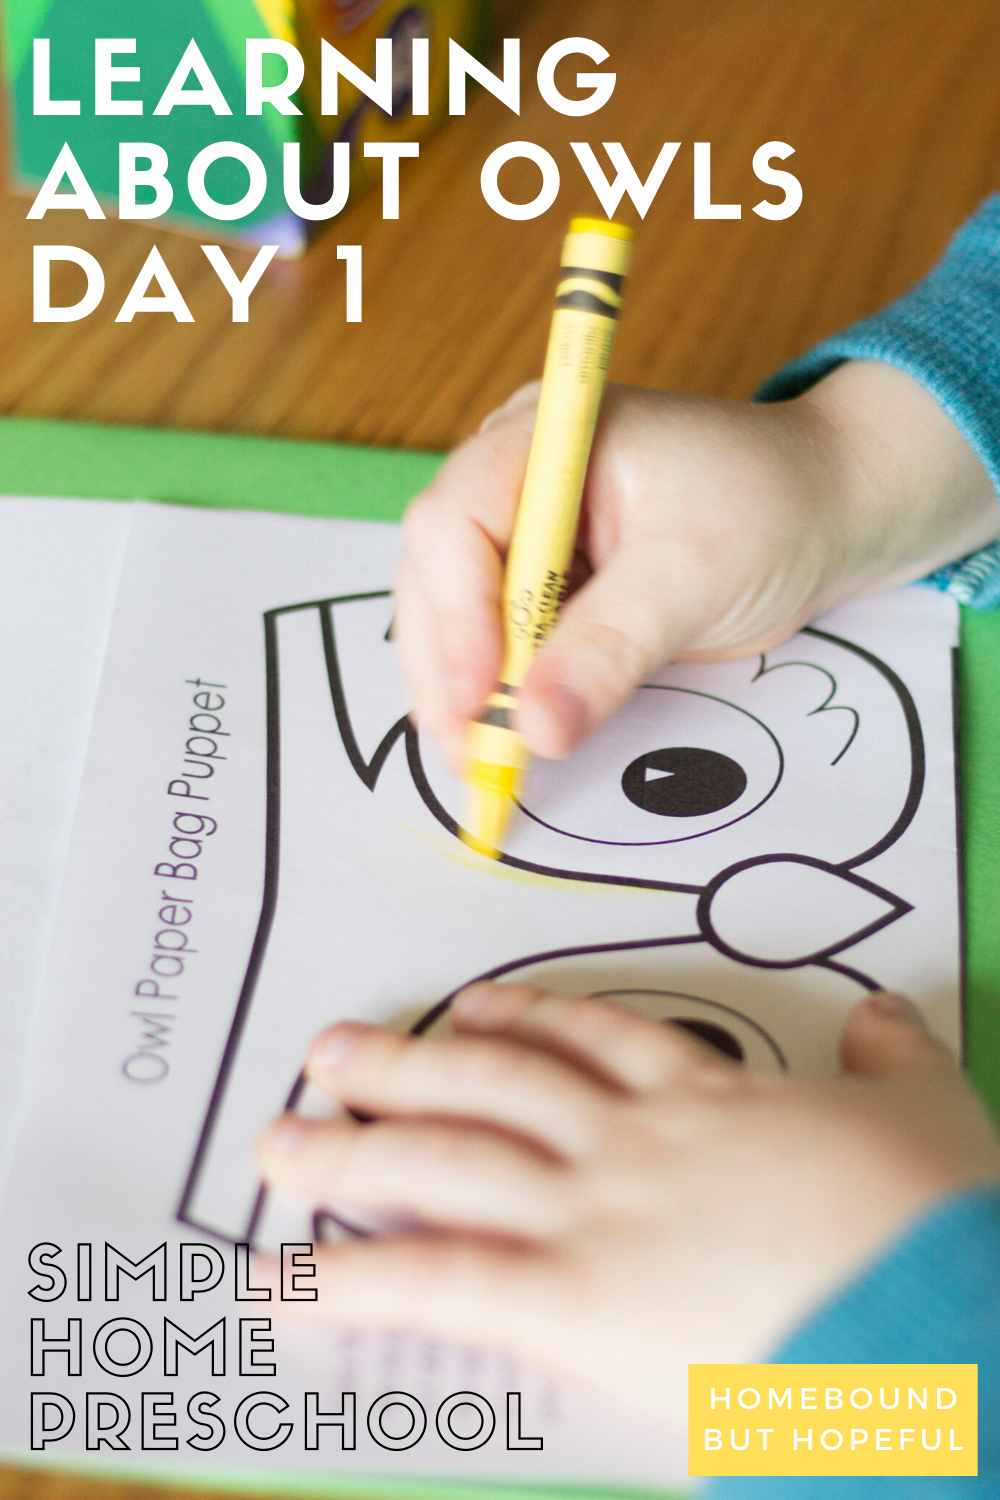 This week the kids and I are learning about owls in our simple home preschool. Check out the fun we had on Day 1! #homepreschool #prekindergarten #earlylearning 